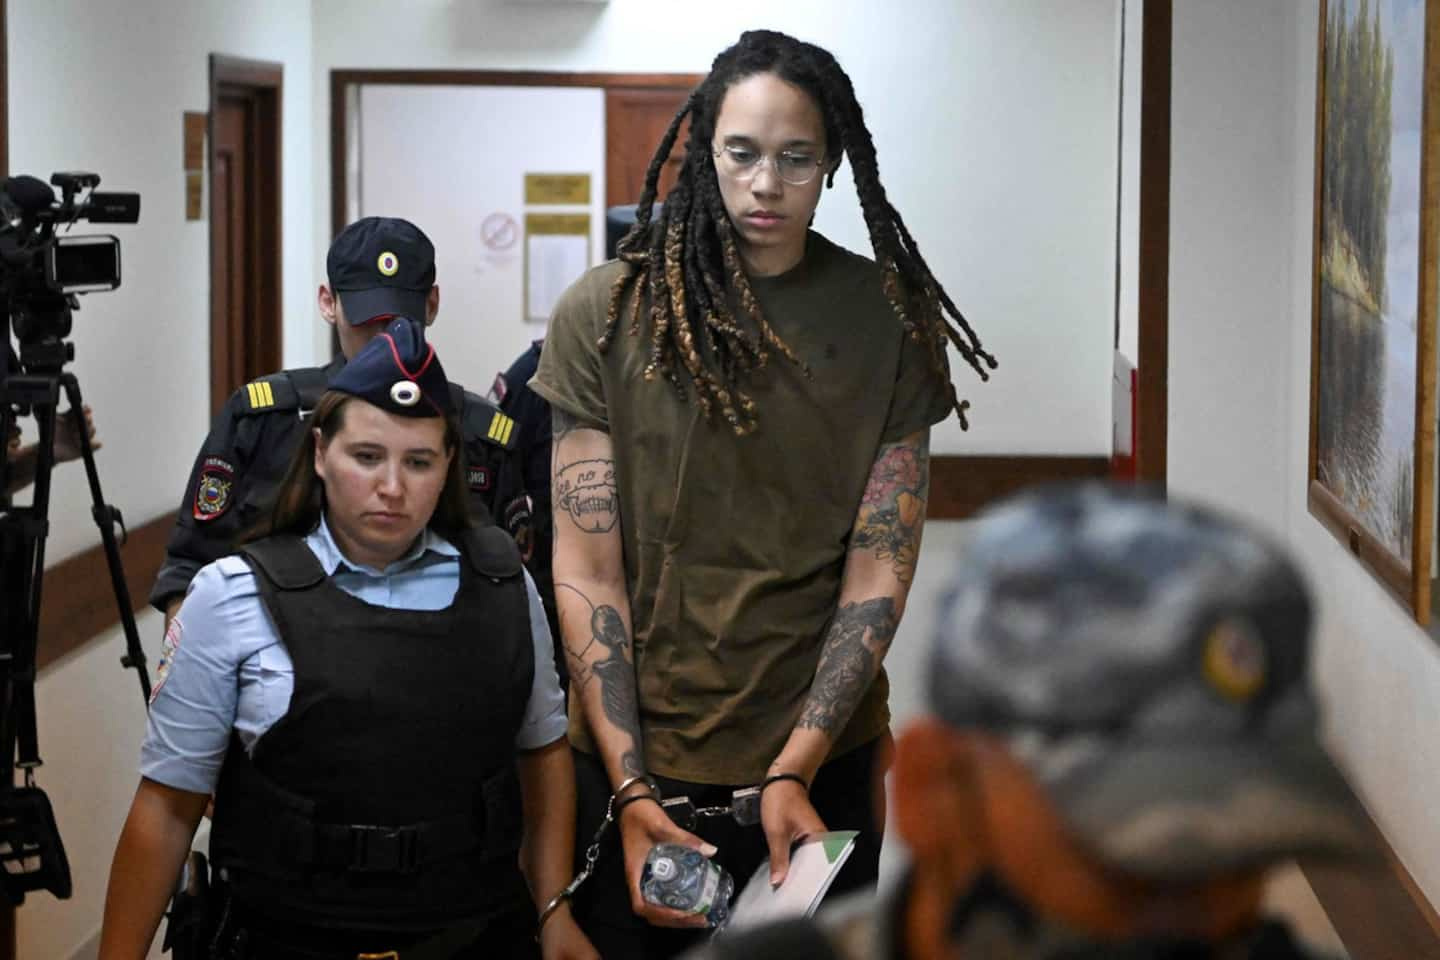 Tried in Russia, Brittney Griner hopes to “come home”